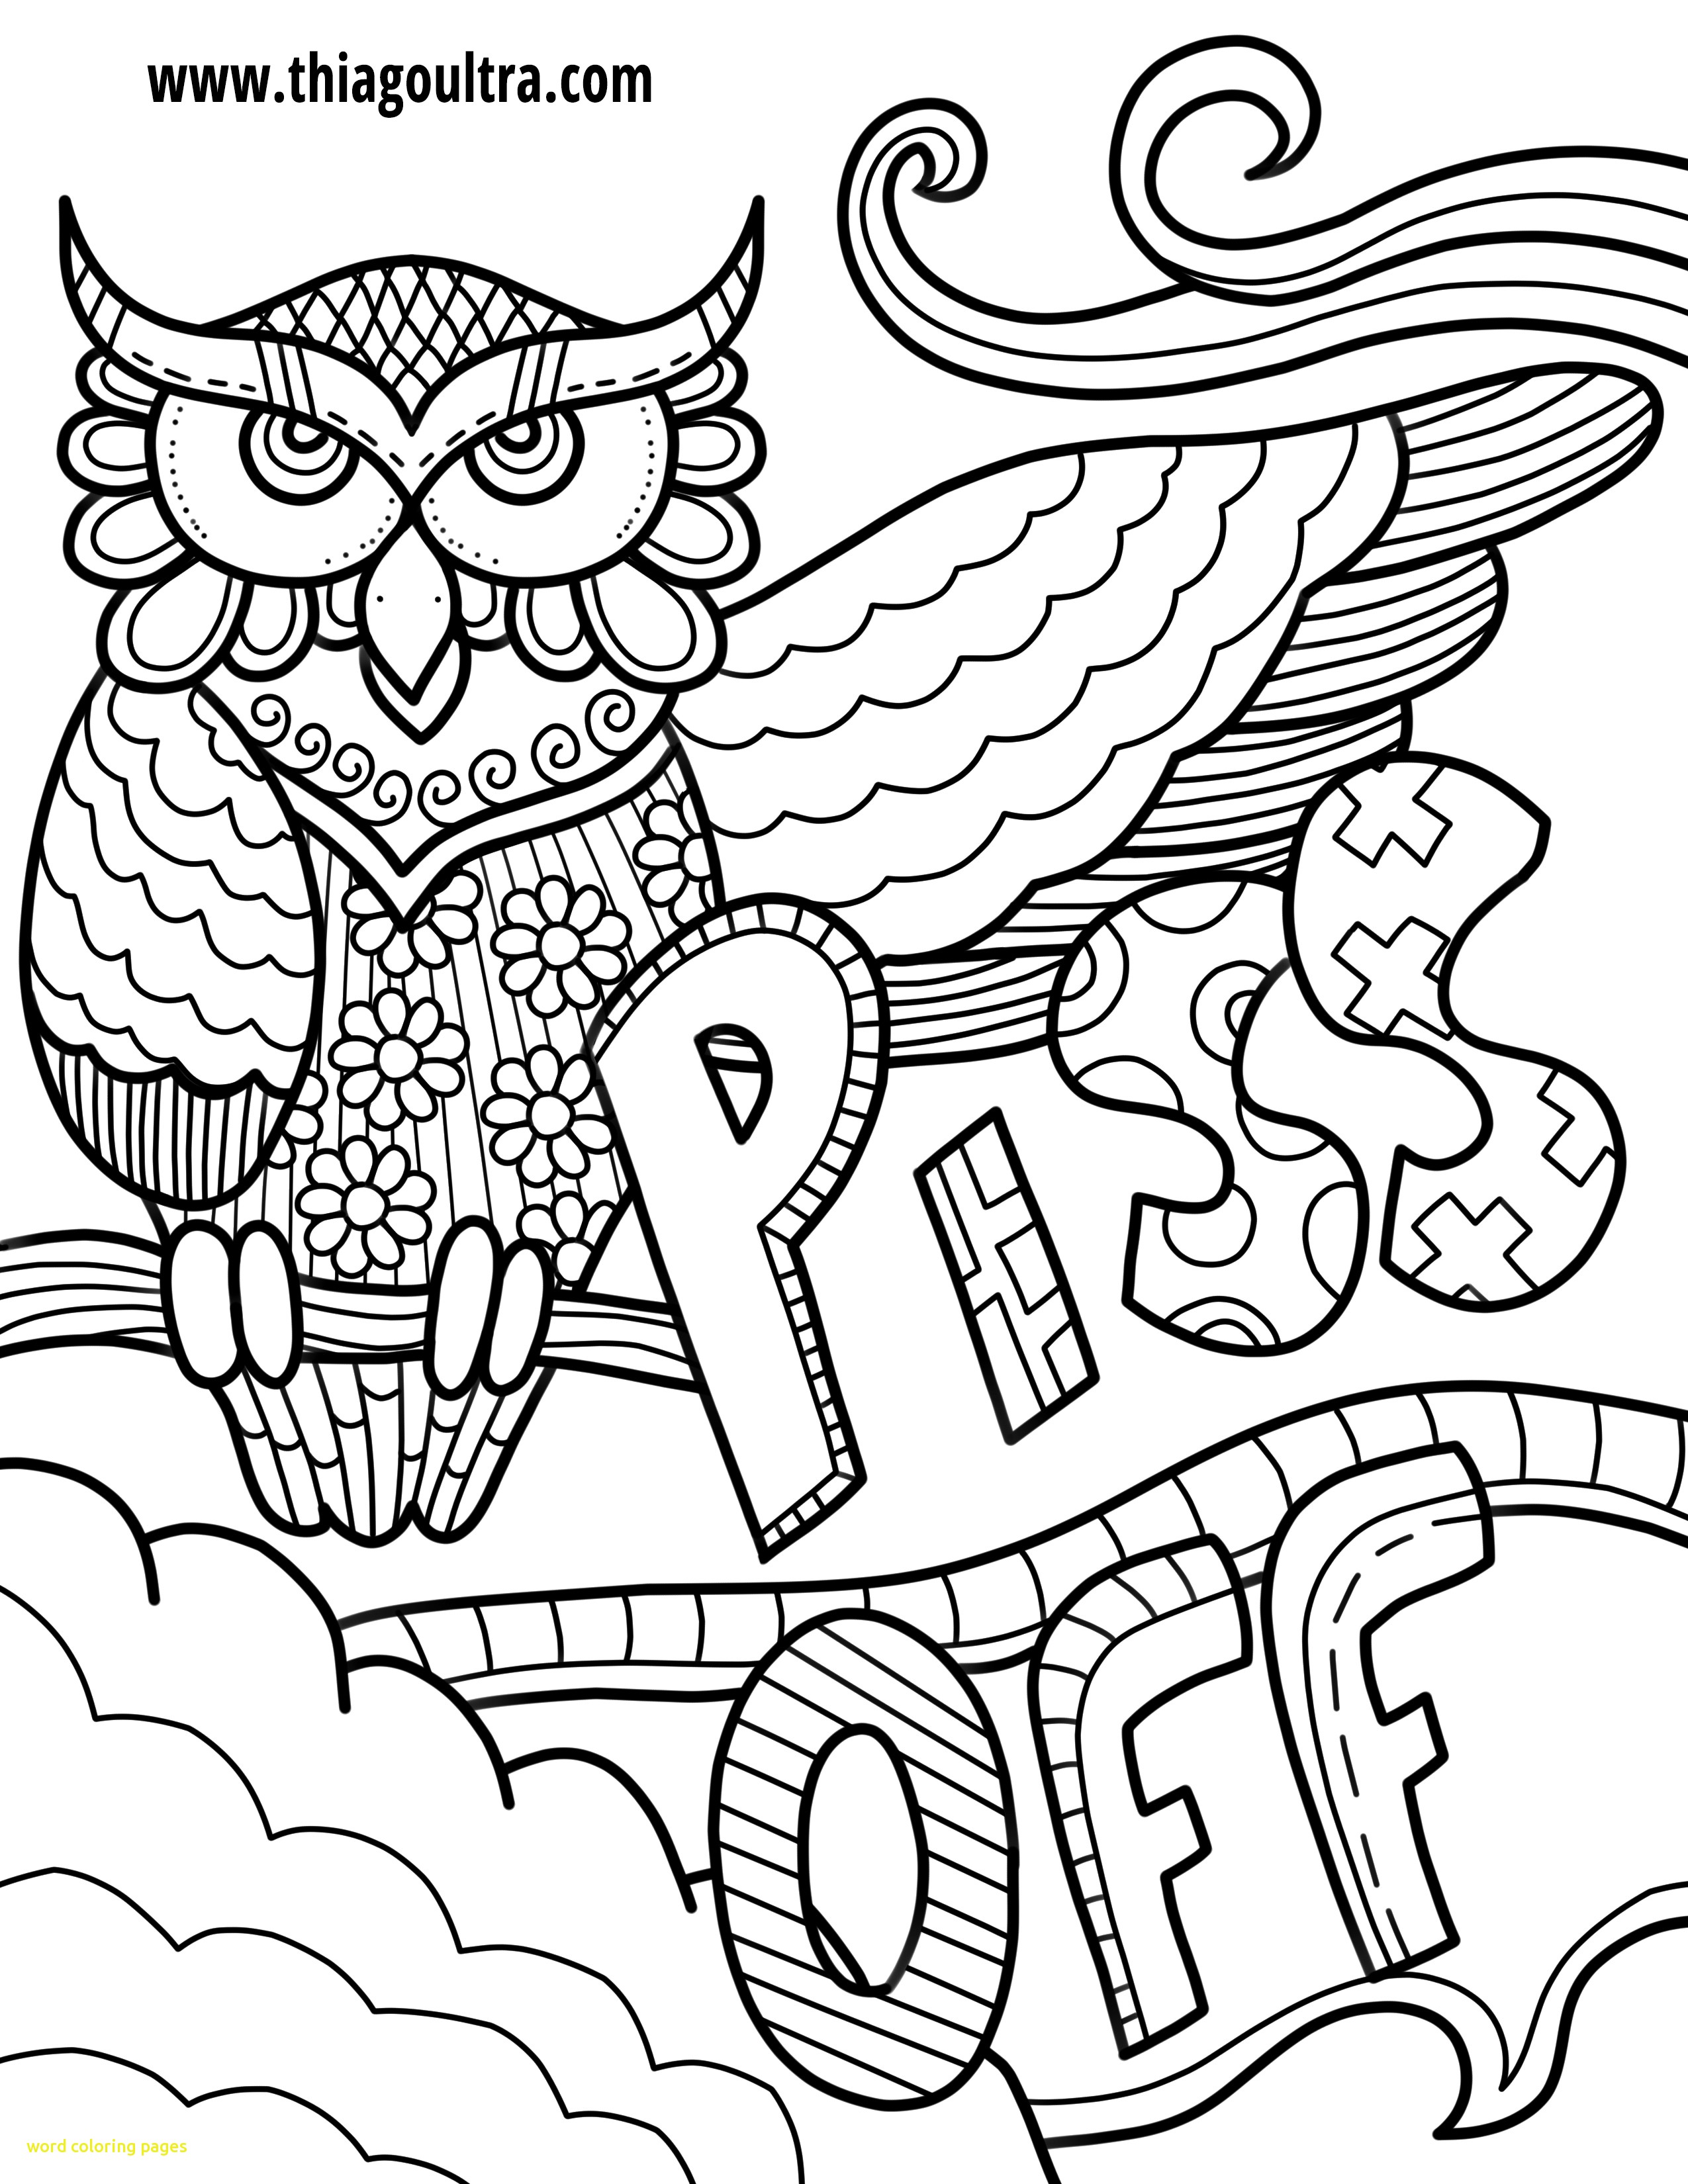 color-word-coloring-pages-at-getdrawings-free-download